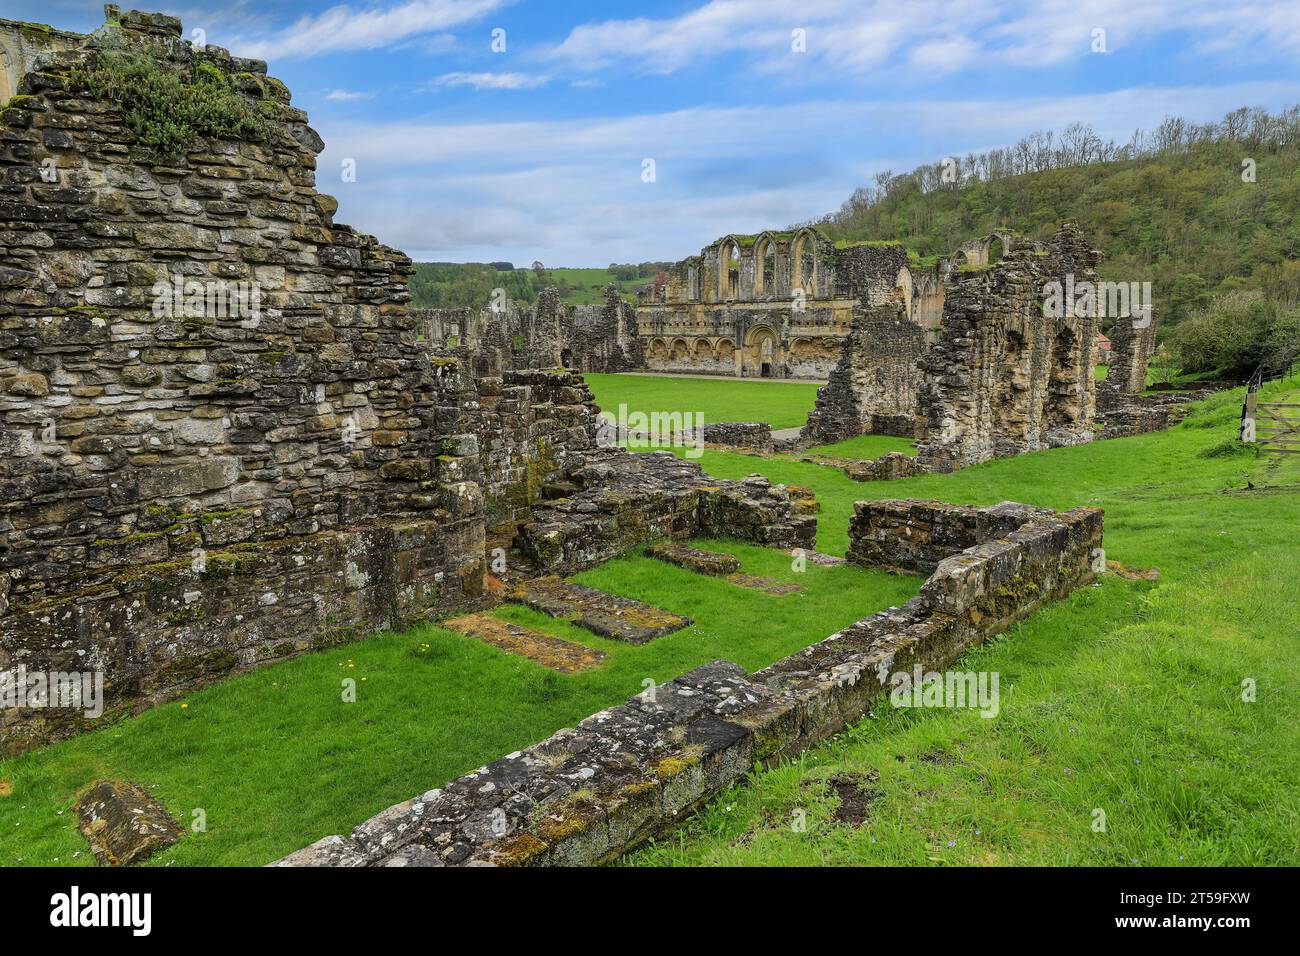 The remains of the Refectory at the Rievaulx Abbey ruins, Rievaulx, near Helmsley, in the North York Moors National Park, North Yorkshire, England, UK Stock Photo